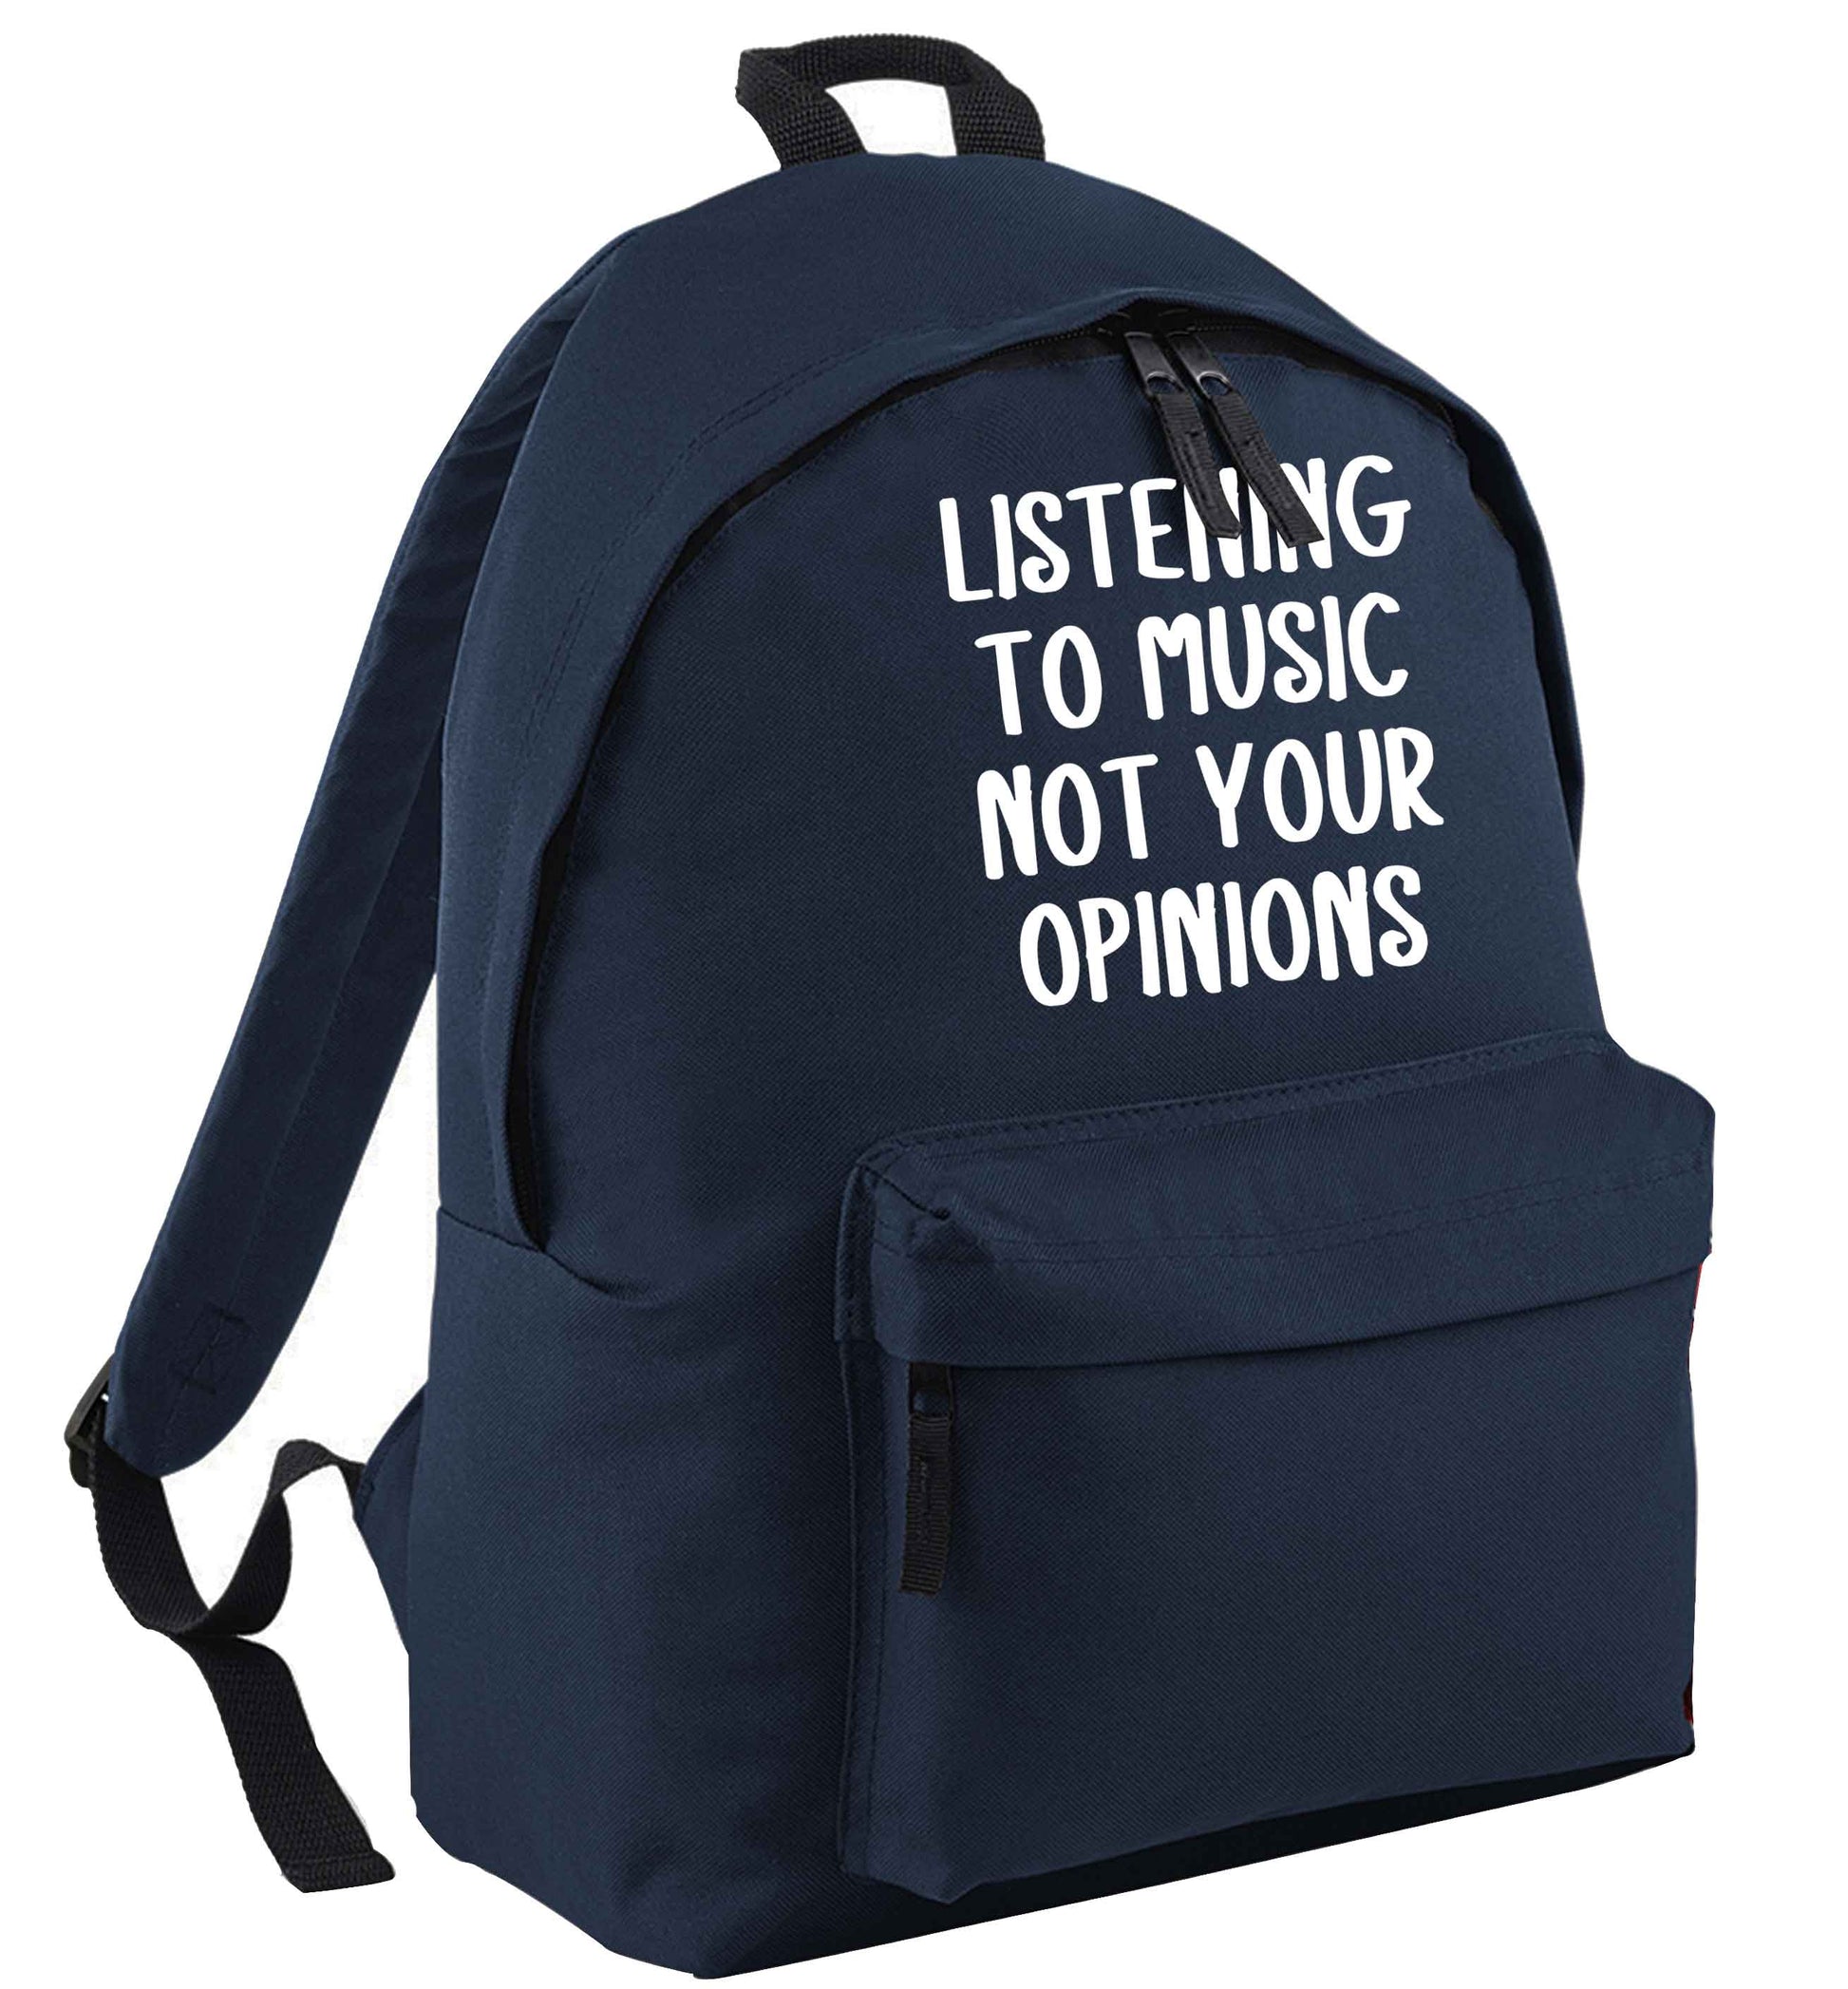 Listening to music not your opinions navy adults backpack